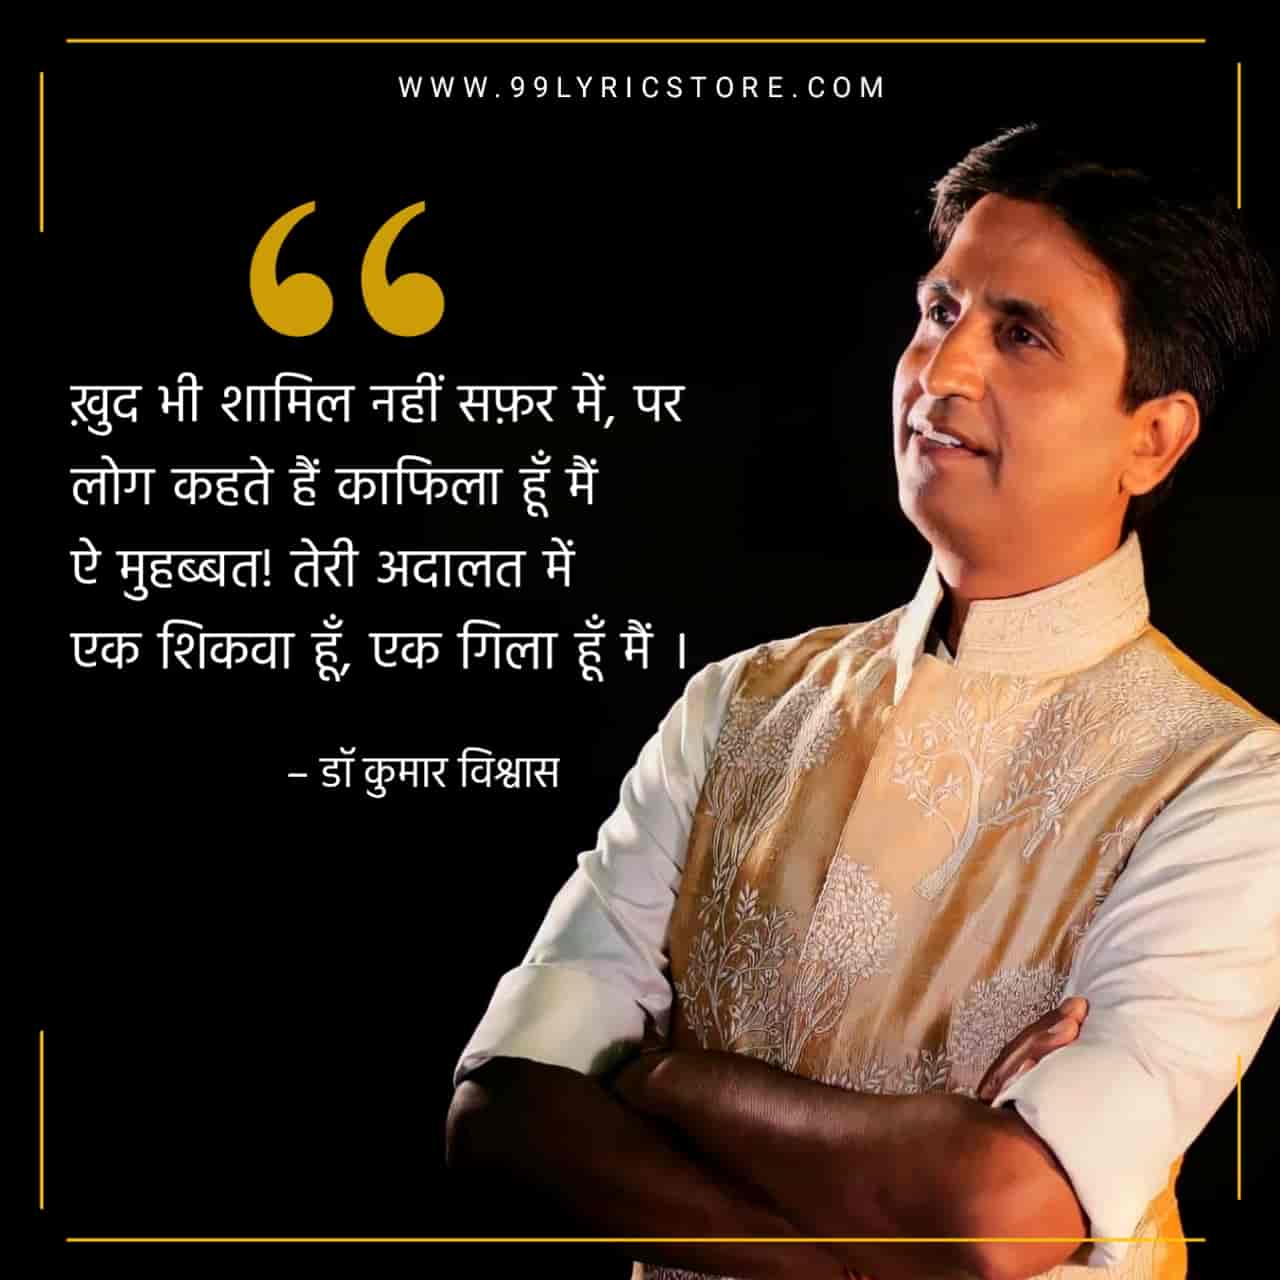 This Beautiful Poetry 'Kab Se Nahi Mila' recited by Dr. Kumar Vishwas and also written by him.